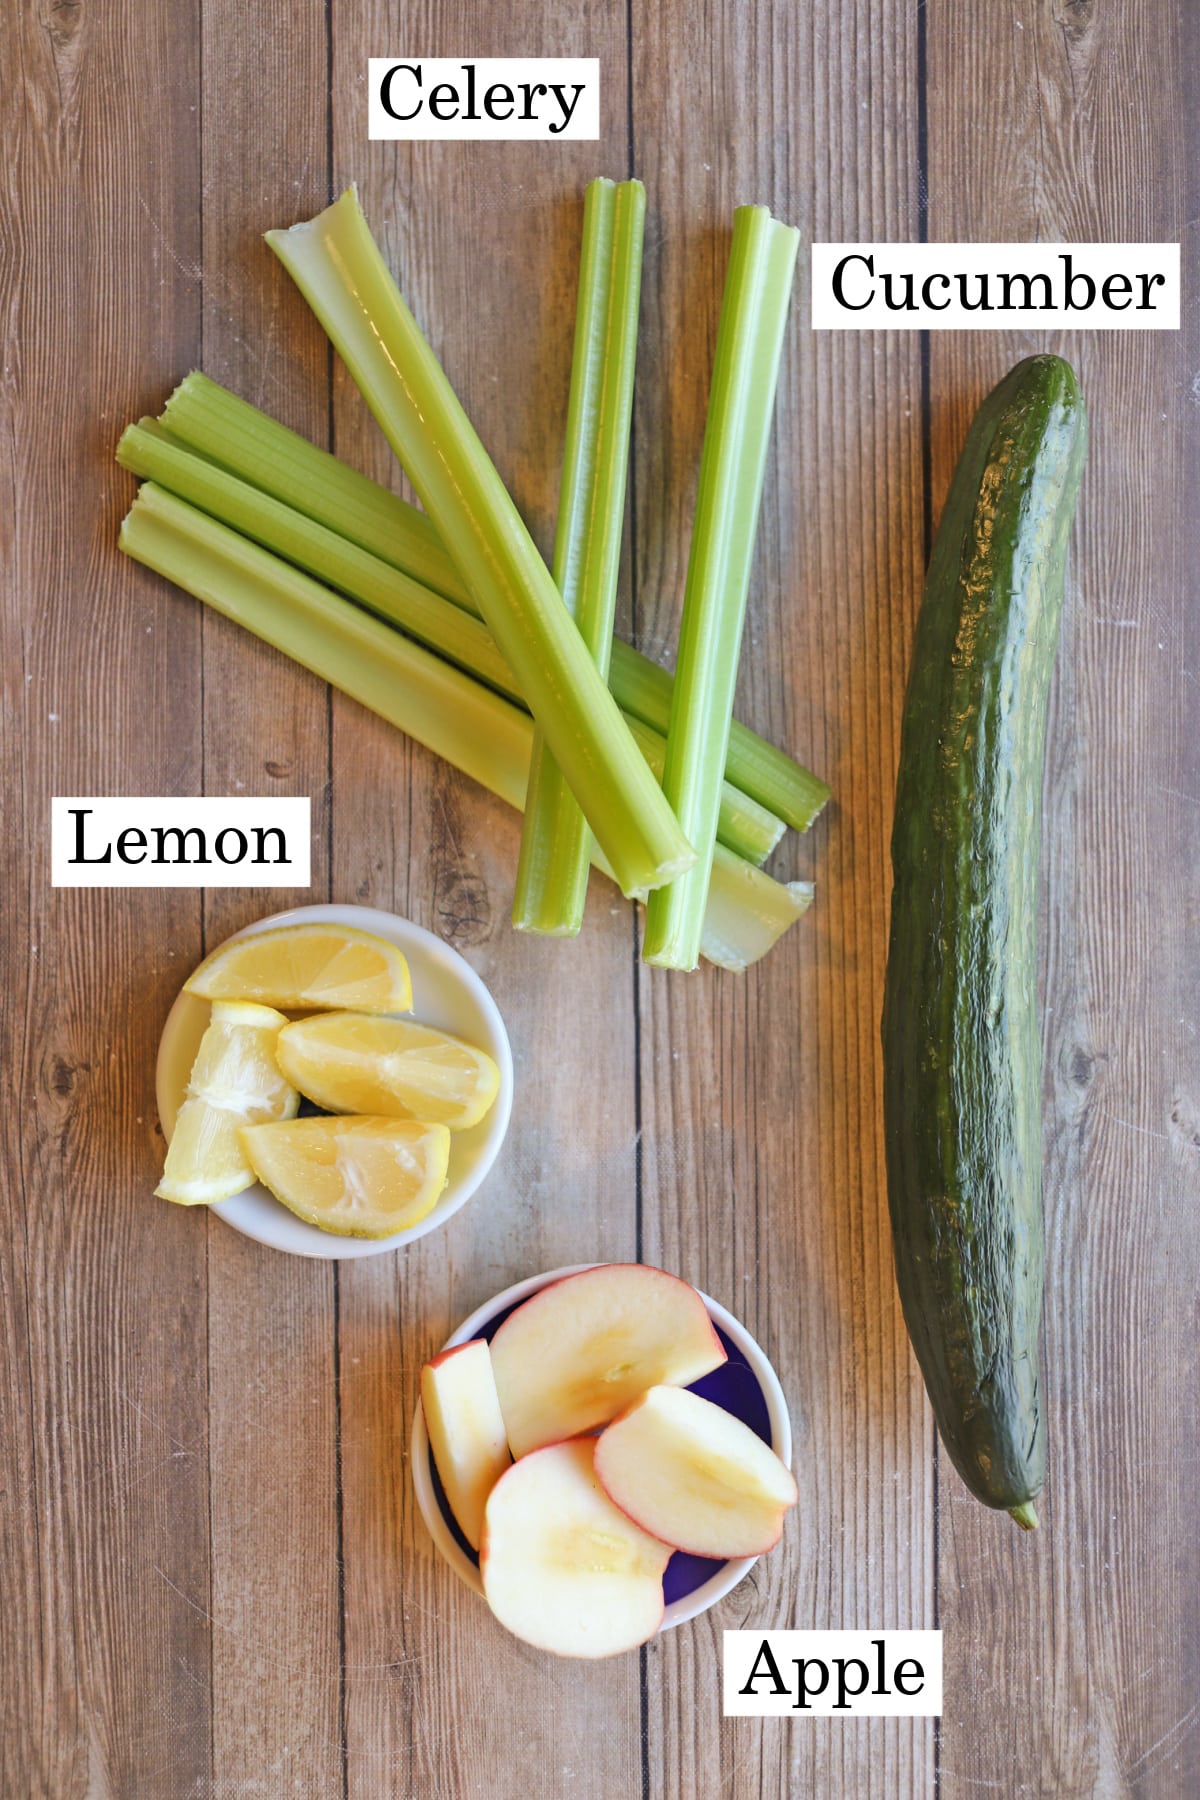 Labeled ingredients for celery and cucumber juice with lemon and apple.